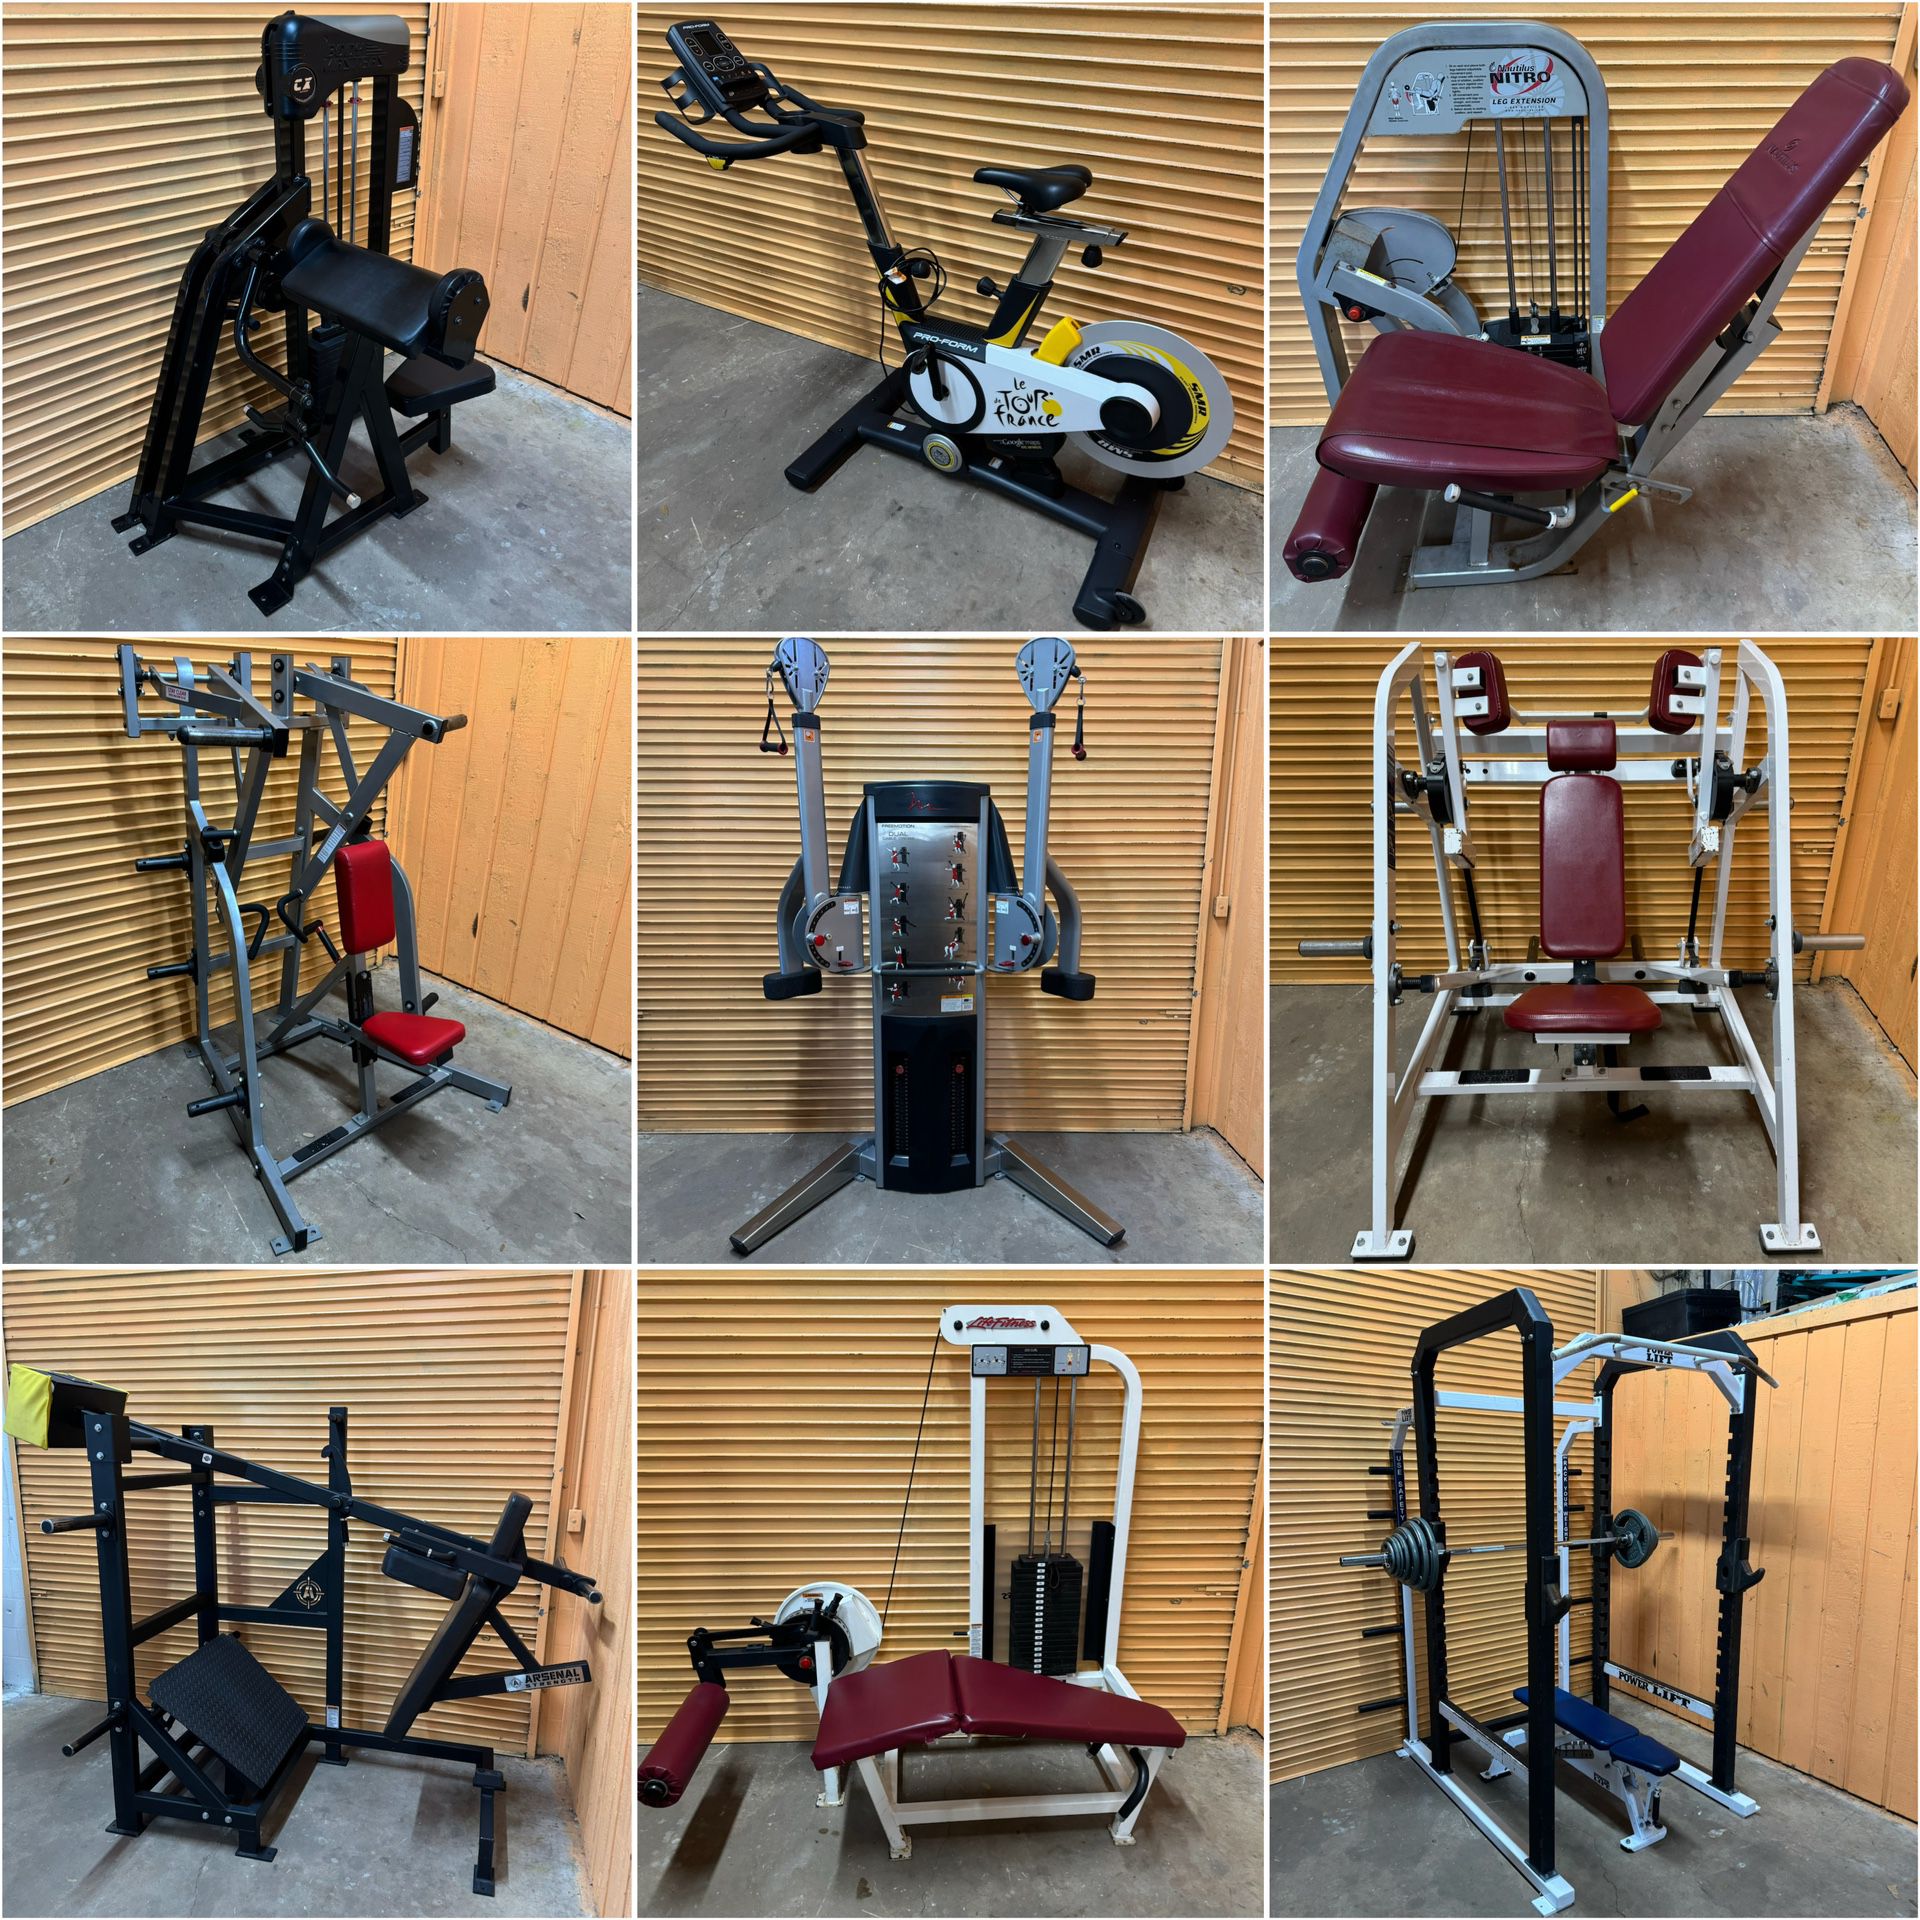 Tons of Commercial Gym Equipment- Squat Rack, Functional Trainer, Weight Bench, Leg Press, Dumbbell Cybex, Nautilus Etc